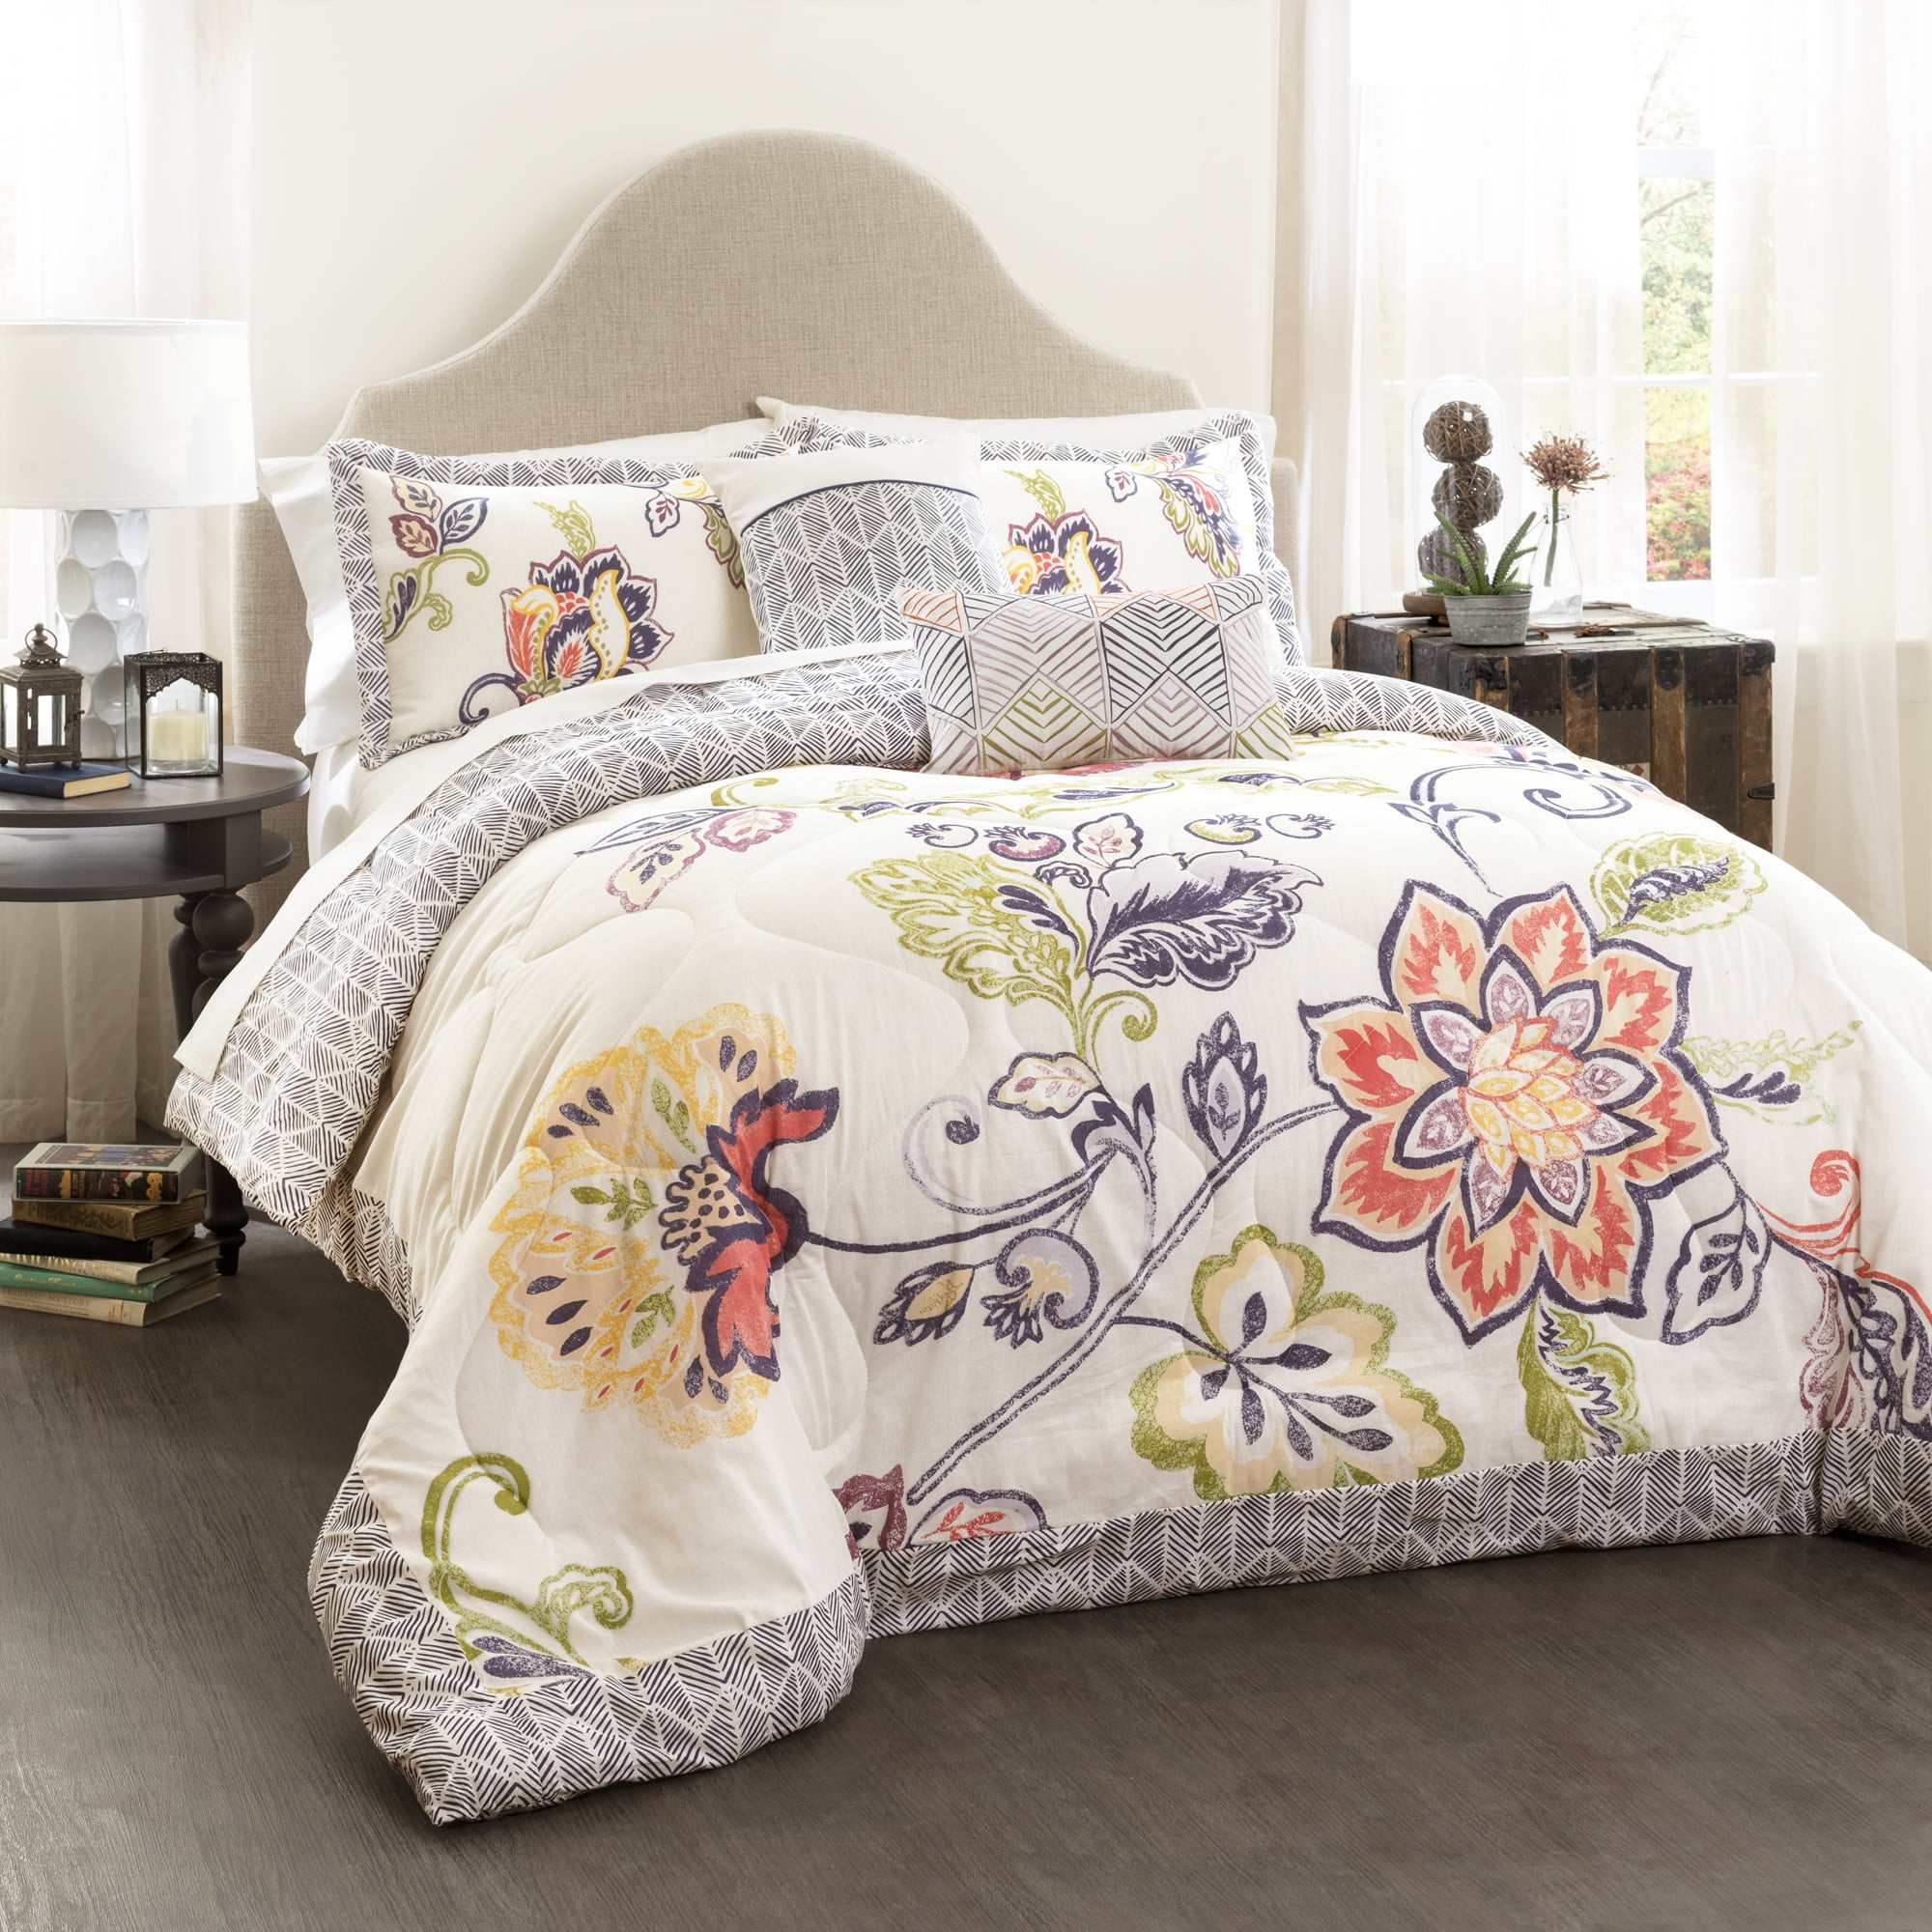 Full//Queen The Lakeside Collection Plaid Pumpkin Decorative Harvest Season Bed Comforter